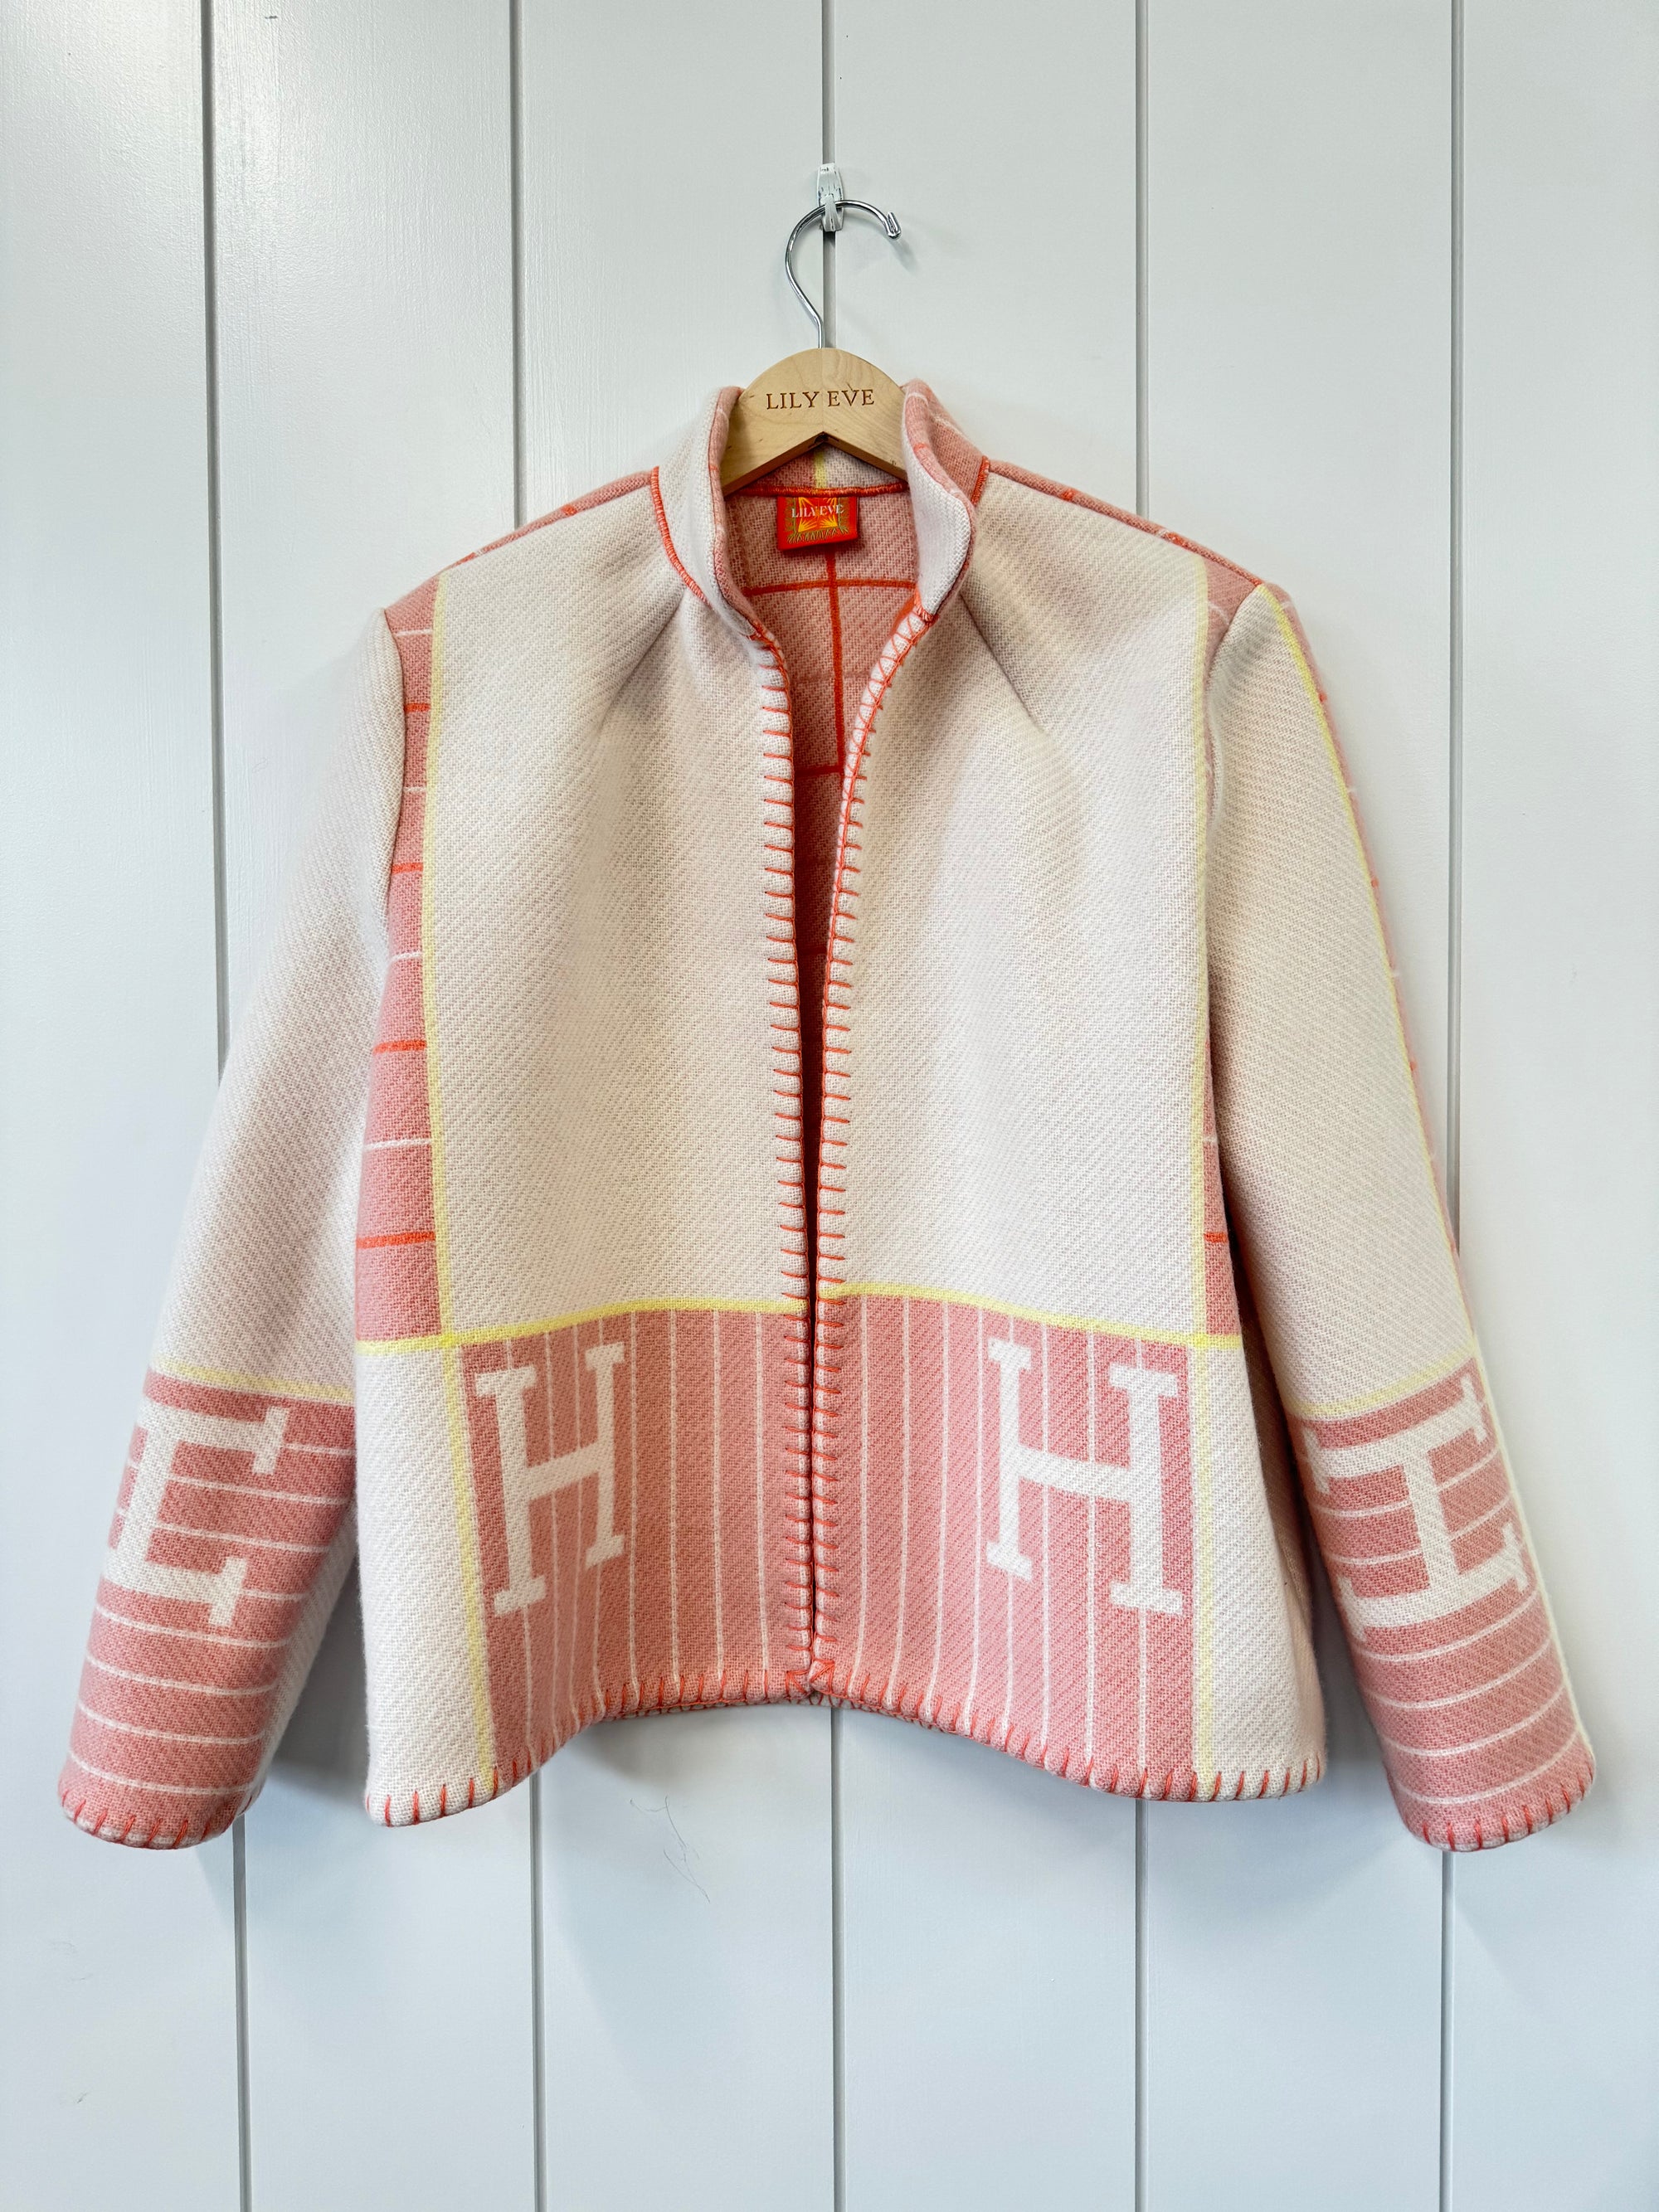 The Pink Patch Jacket